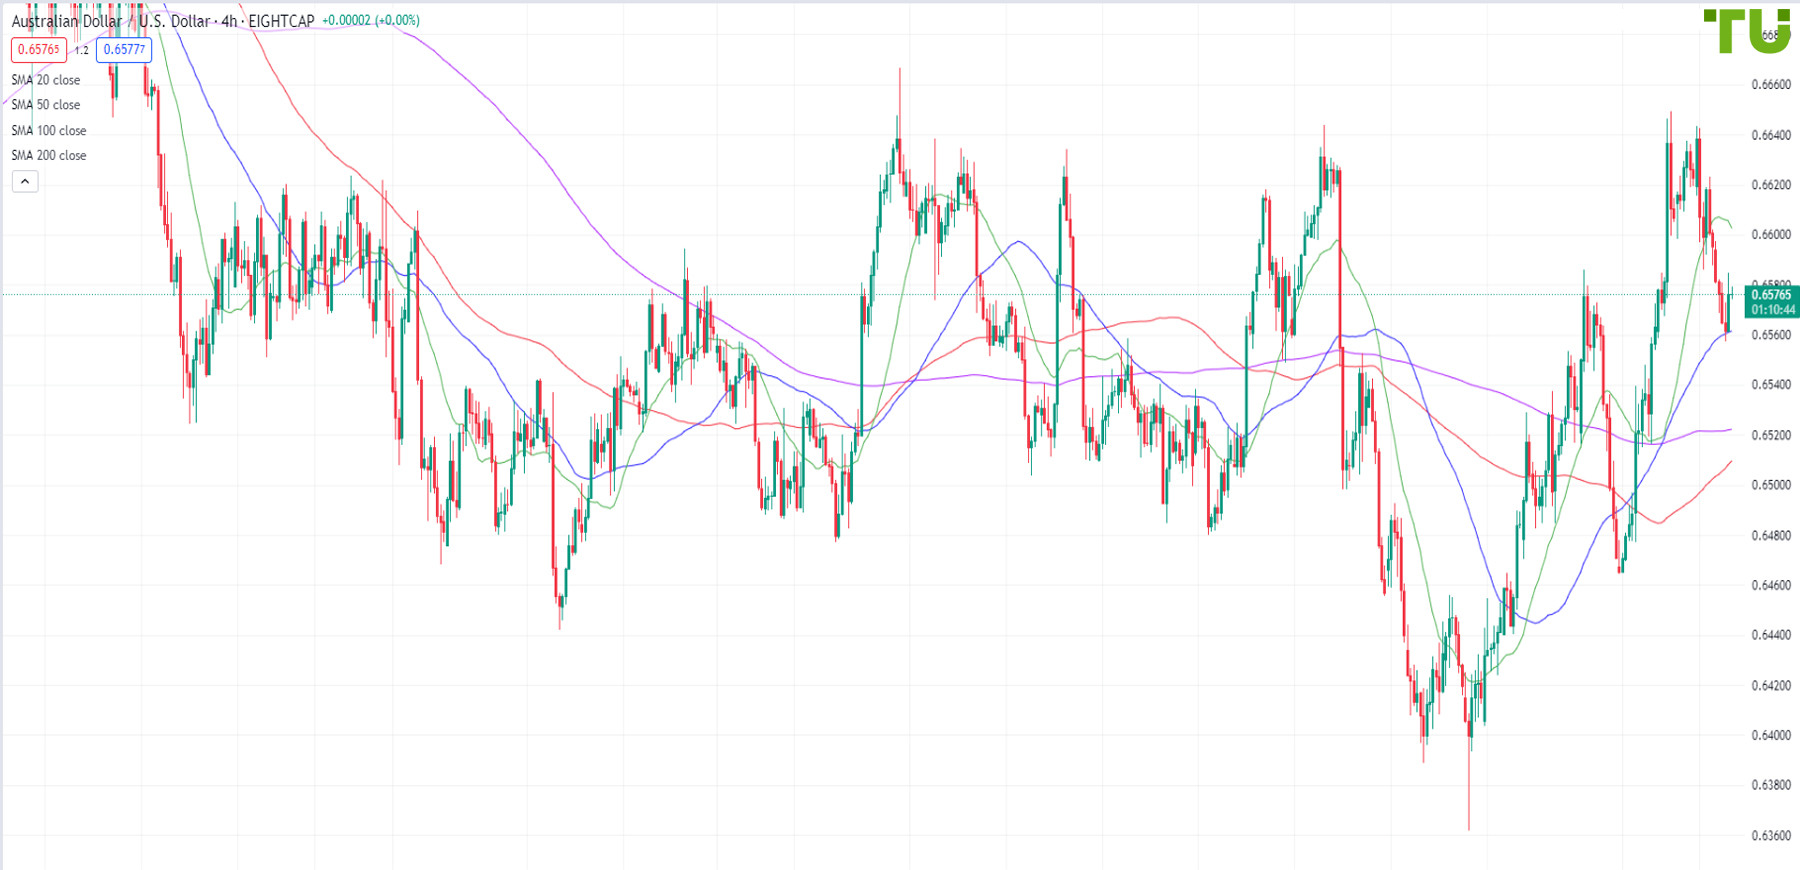 AUD/USD continues decline